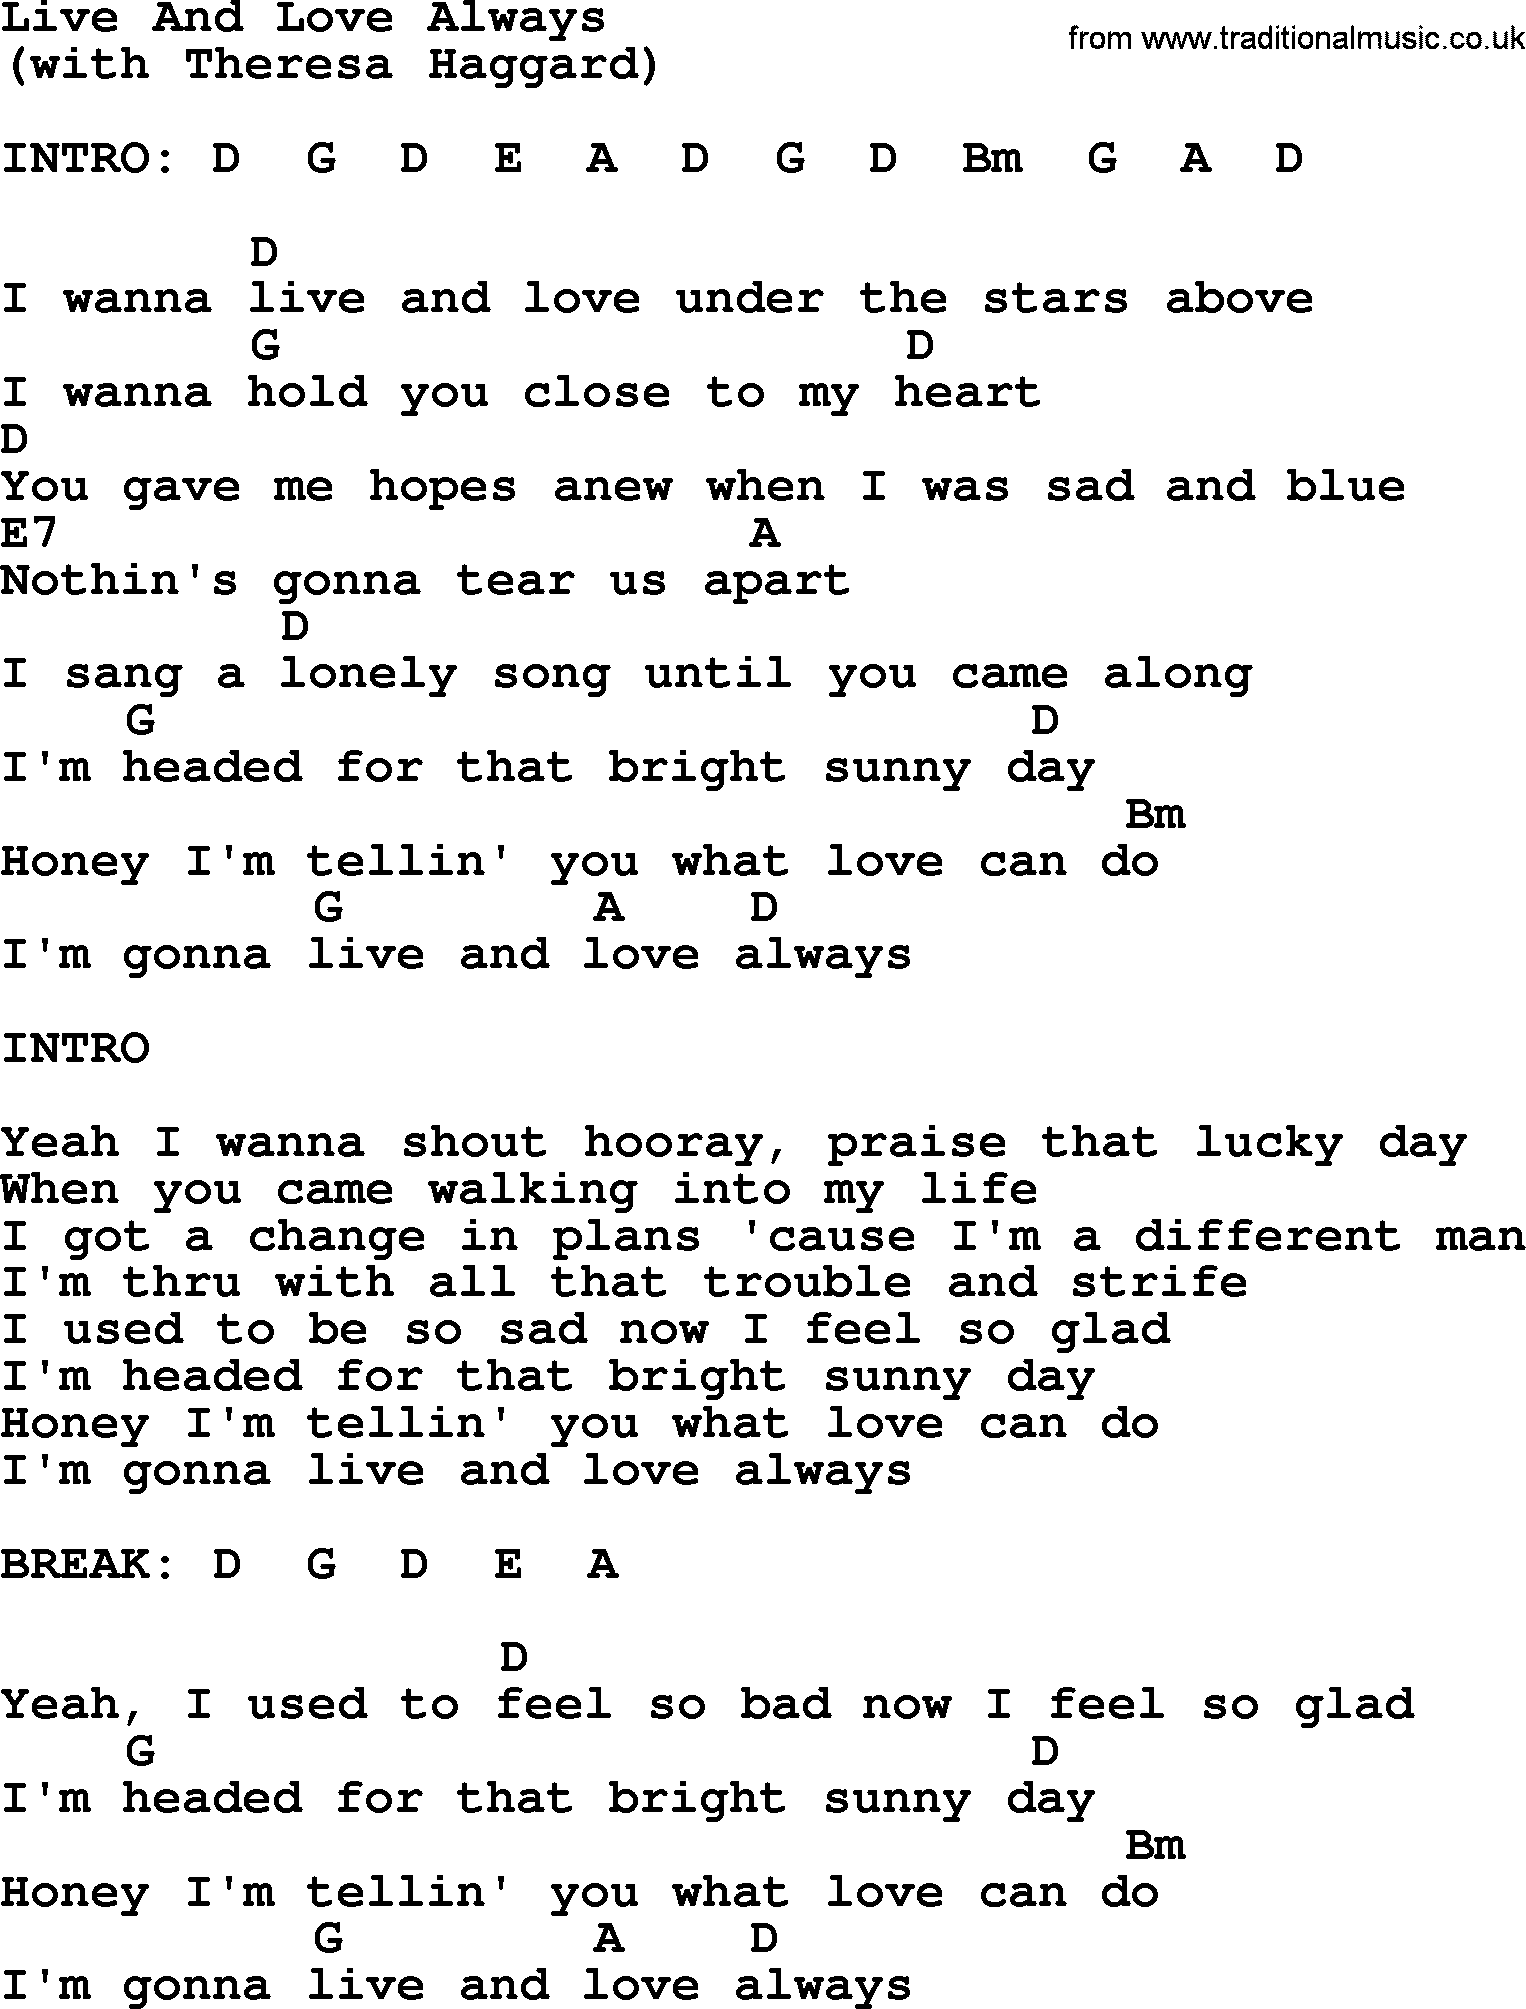 Merle Haggard song: Live And Love Always, lyrics and chords